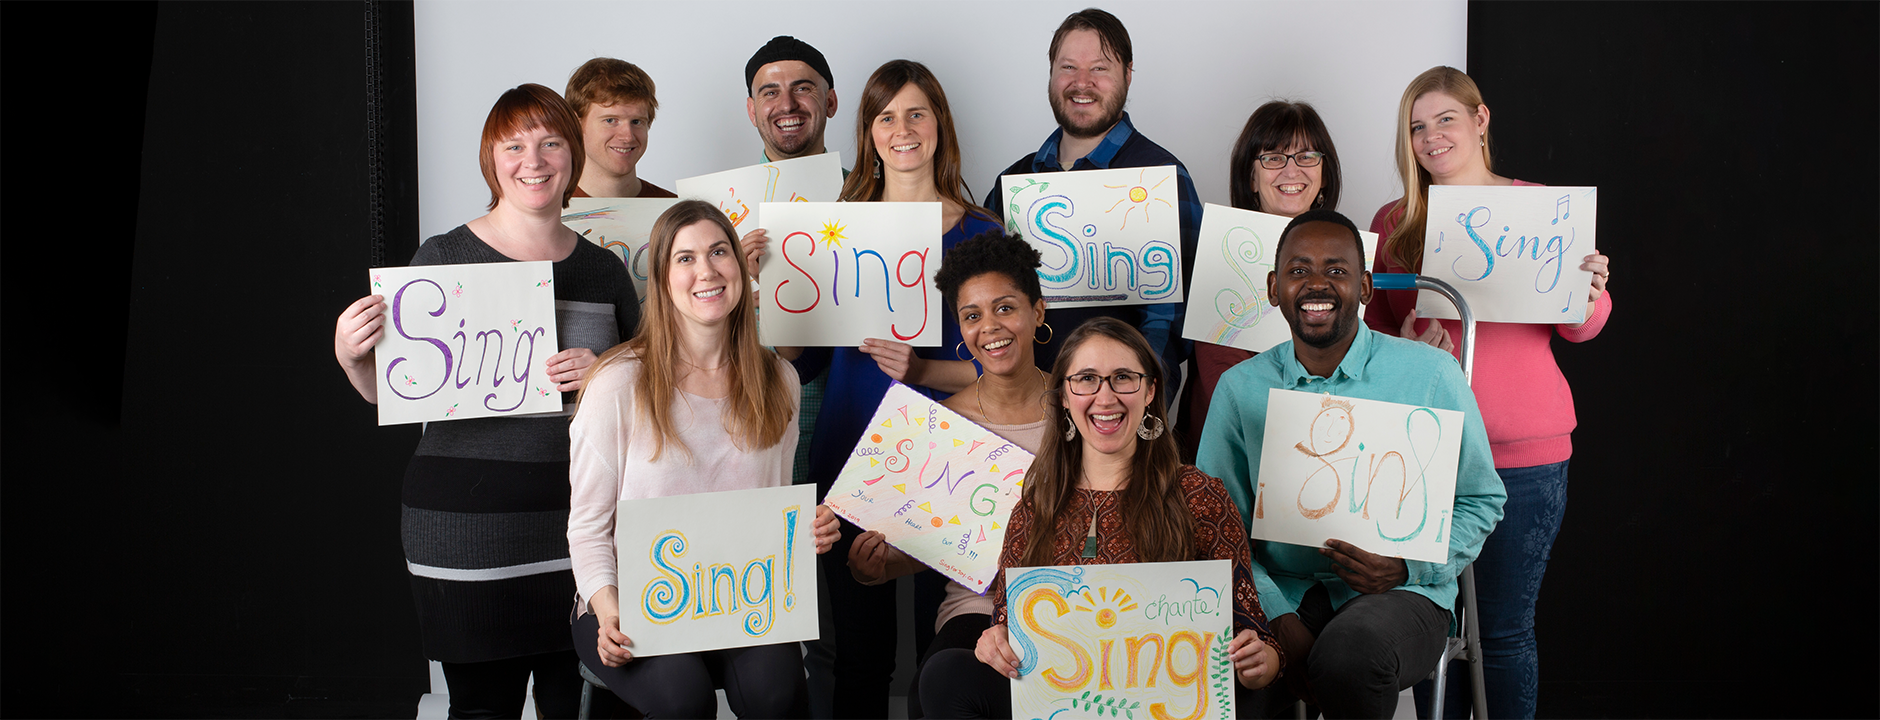 The Benefits of Group Singing